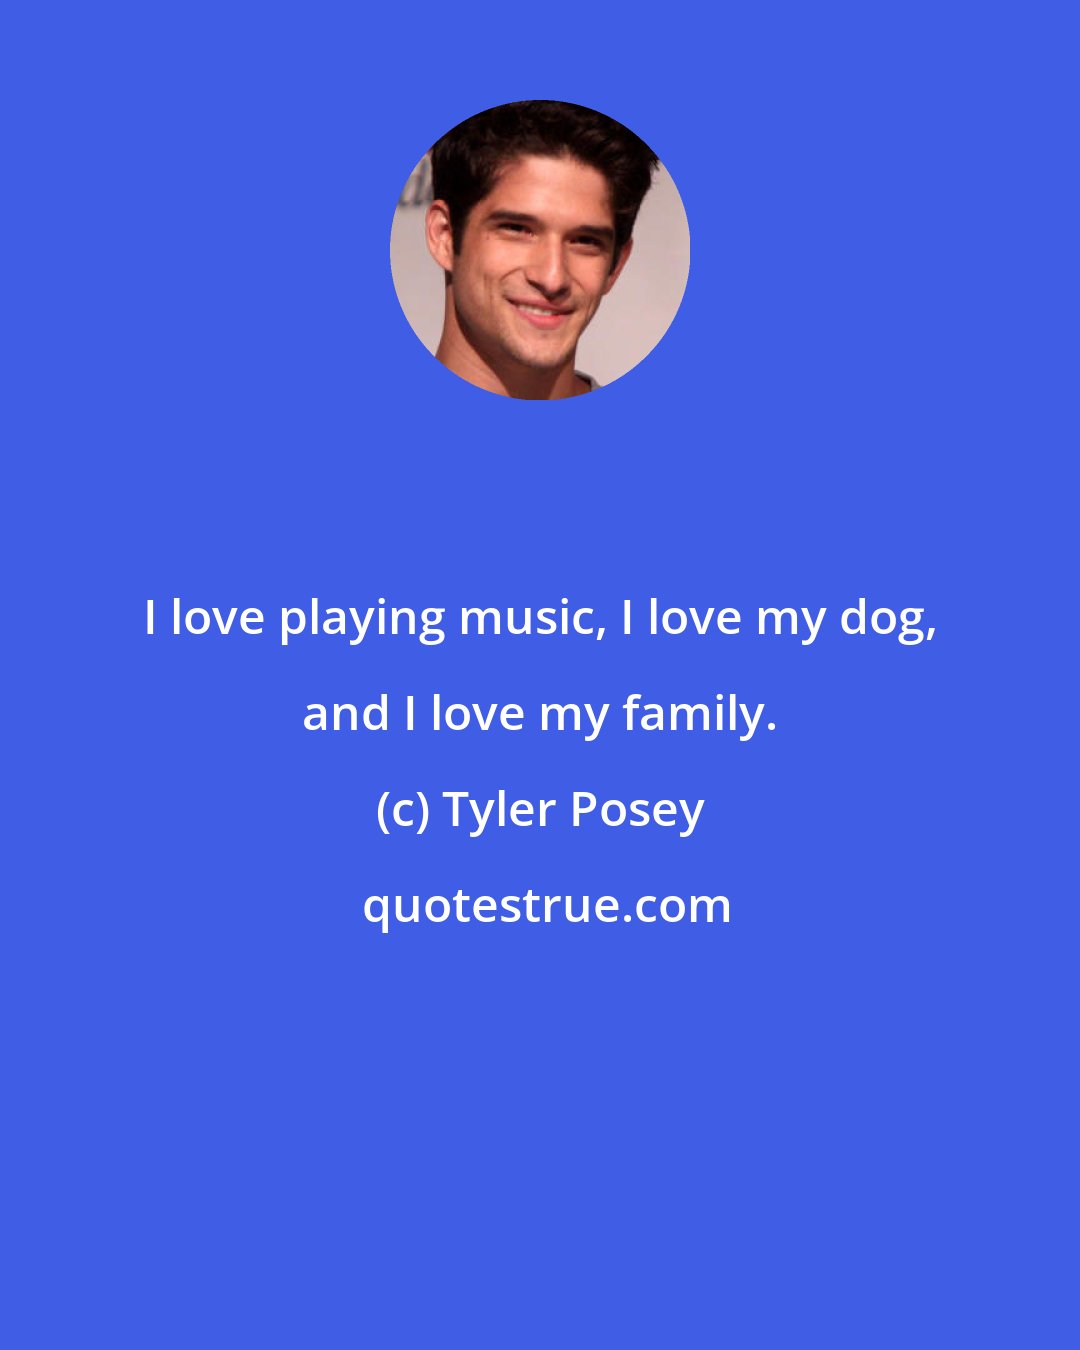 Tyler Posey: I love playing music, I love my dog, and I love my family.